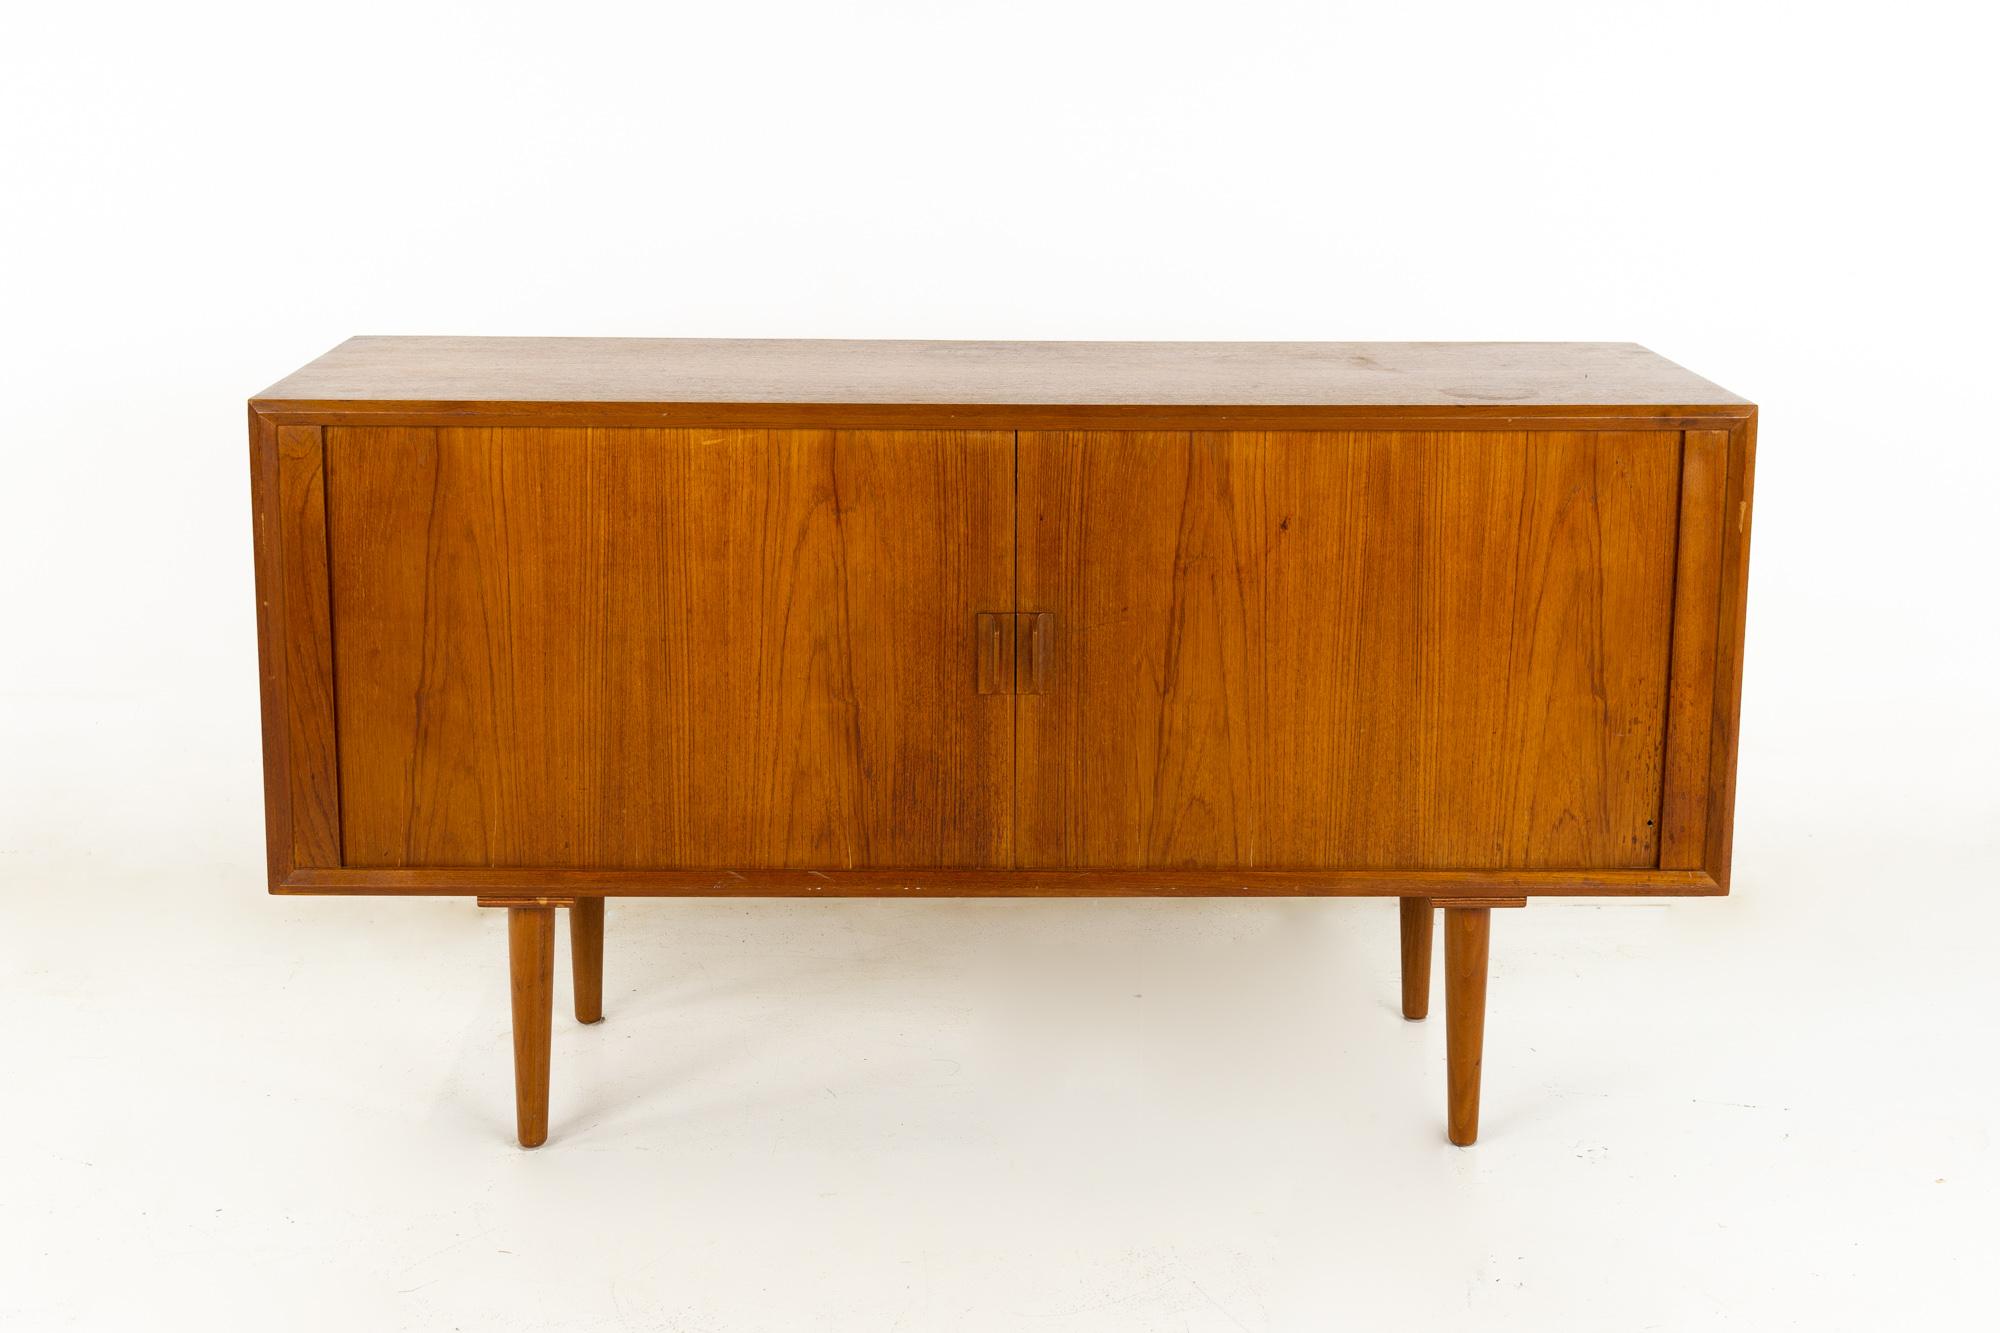 Svend Aage Larsen for Faarup Mobelfabrik mid century Danish teak Tambour door petite sideboard Credenza
This credenza measures: 59 wide x 19 deep x 32 inches high

All pieces of furniture can be had in what we call restored vintage condition.